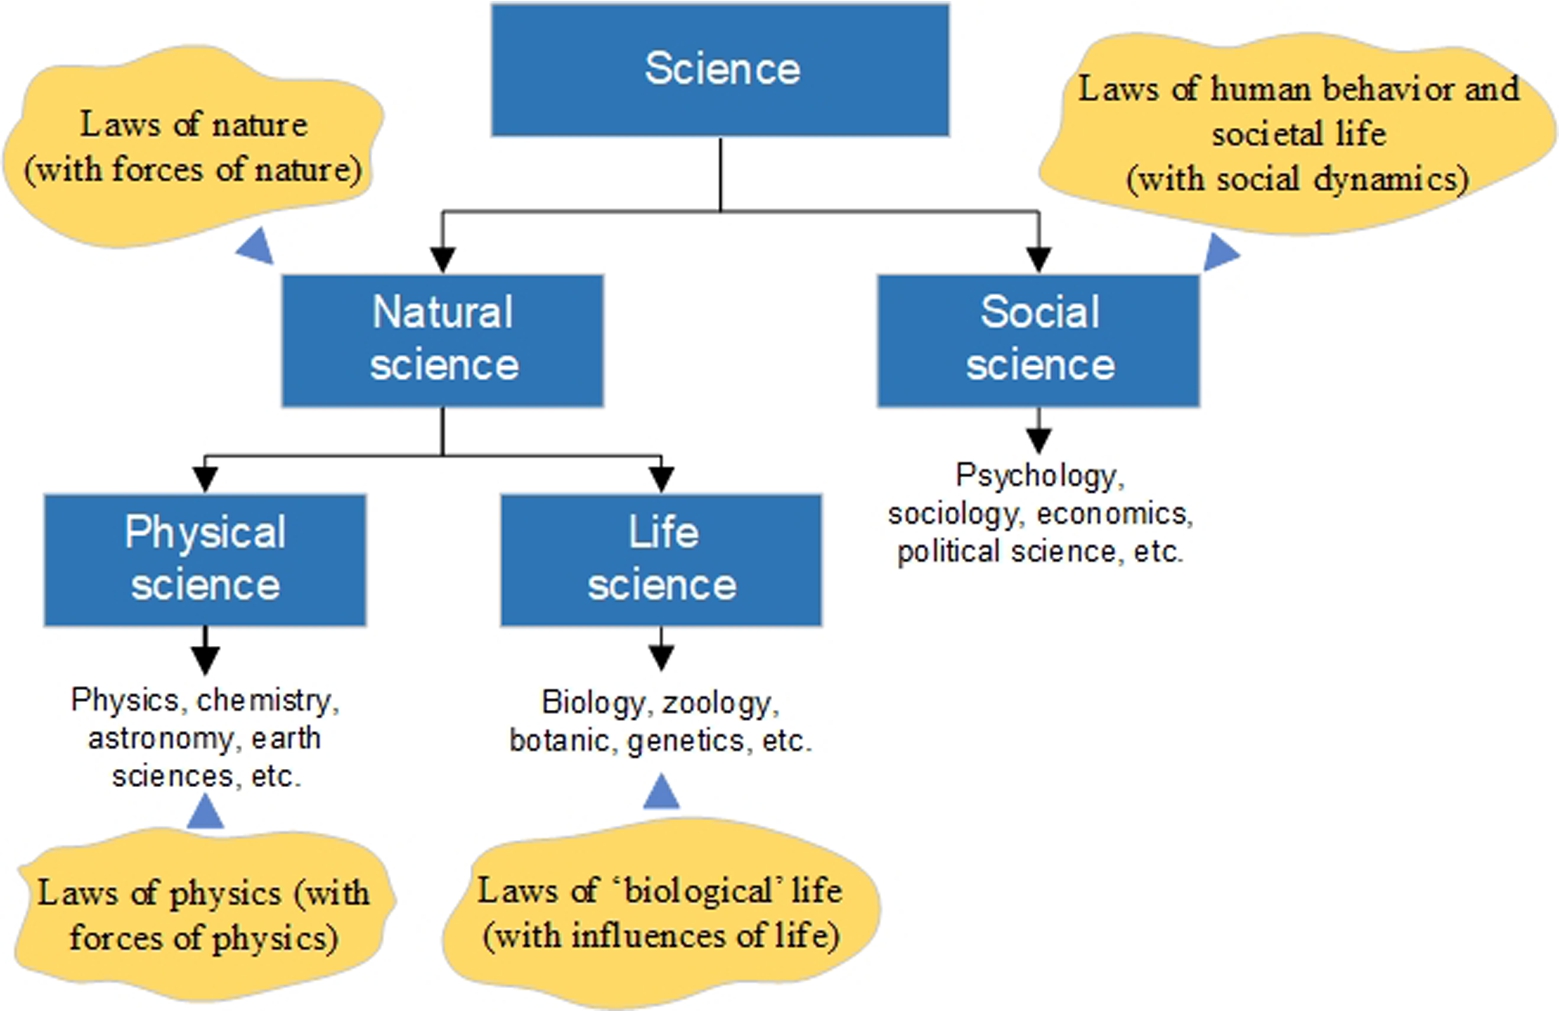 The branches of science, and the set of governing laws and influences associated with each branch.